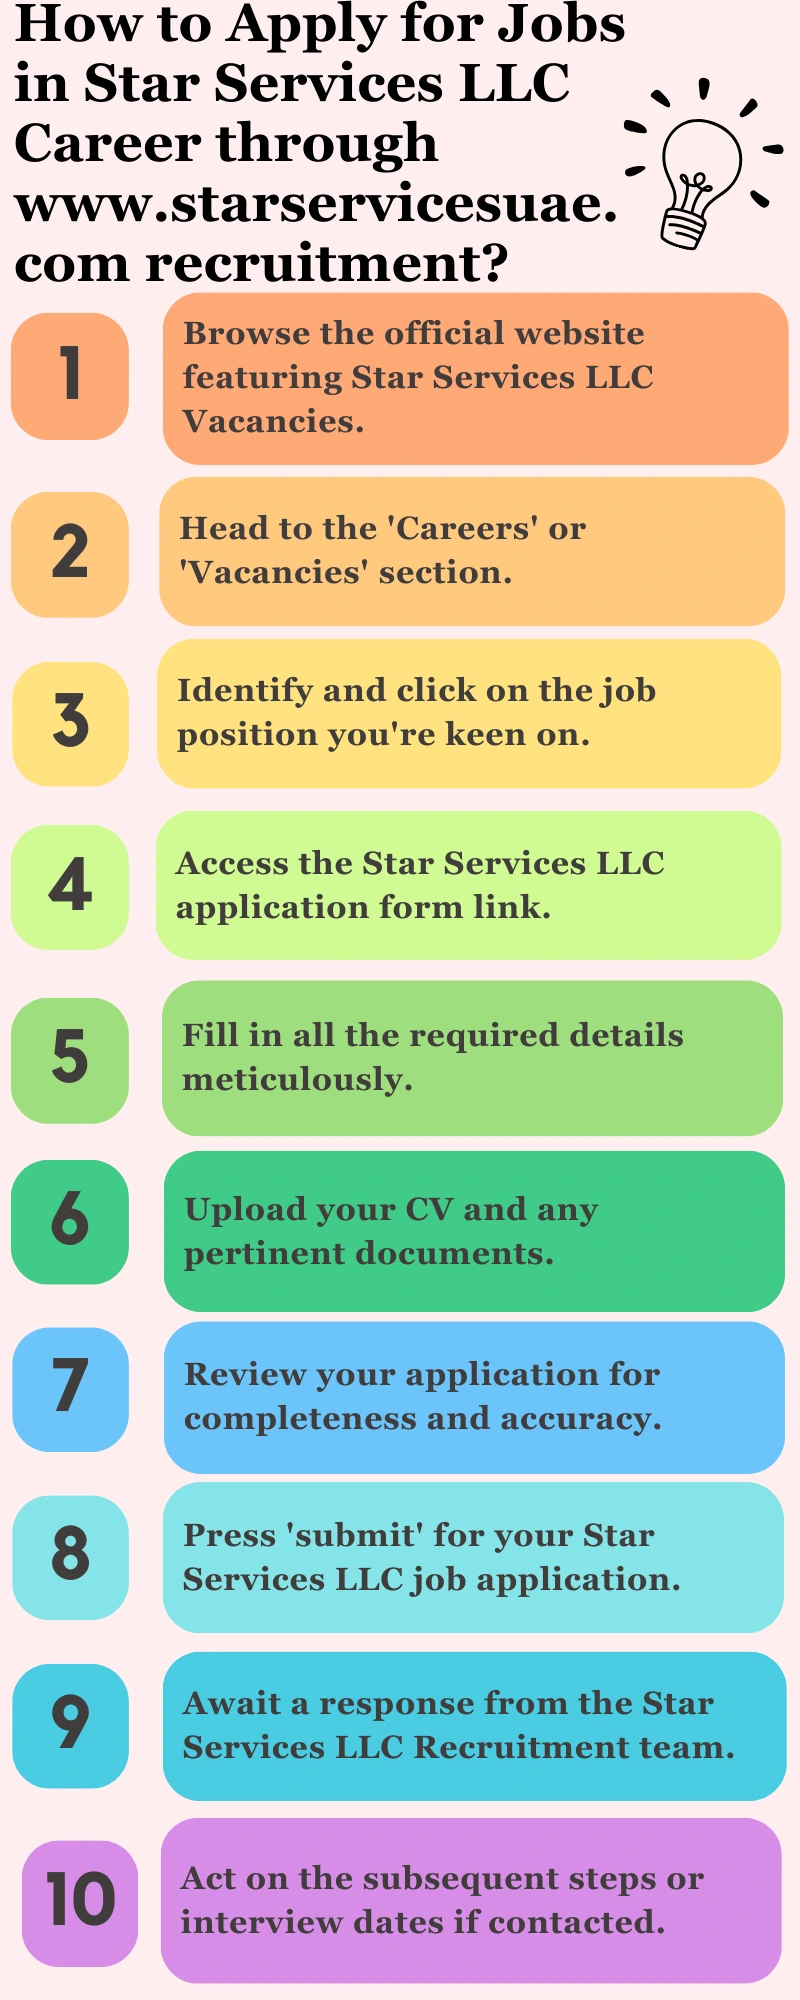 How to Apply for Jobs in Star Services LLC Career through www.starservicesuae.com recruitment?